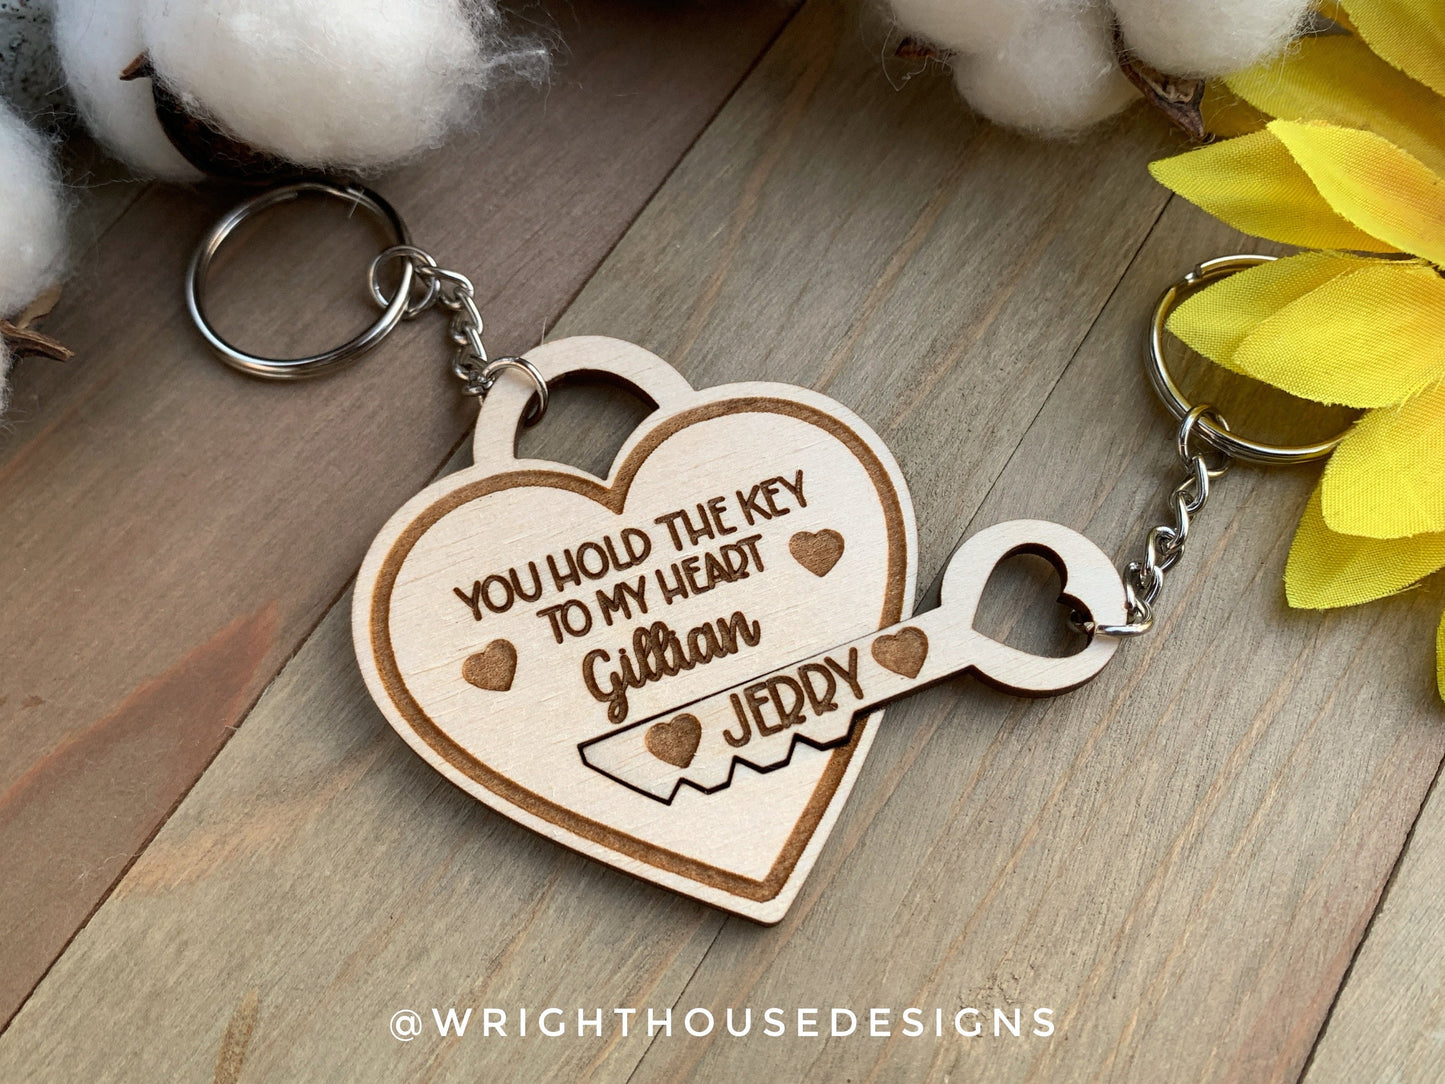 You Hold The Key To My Heart - Personalized Locket and Key Wooden Keychains For Couples On Valentine’s Day